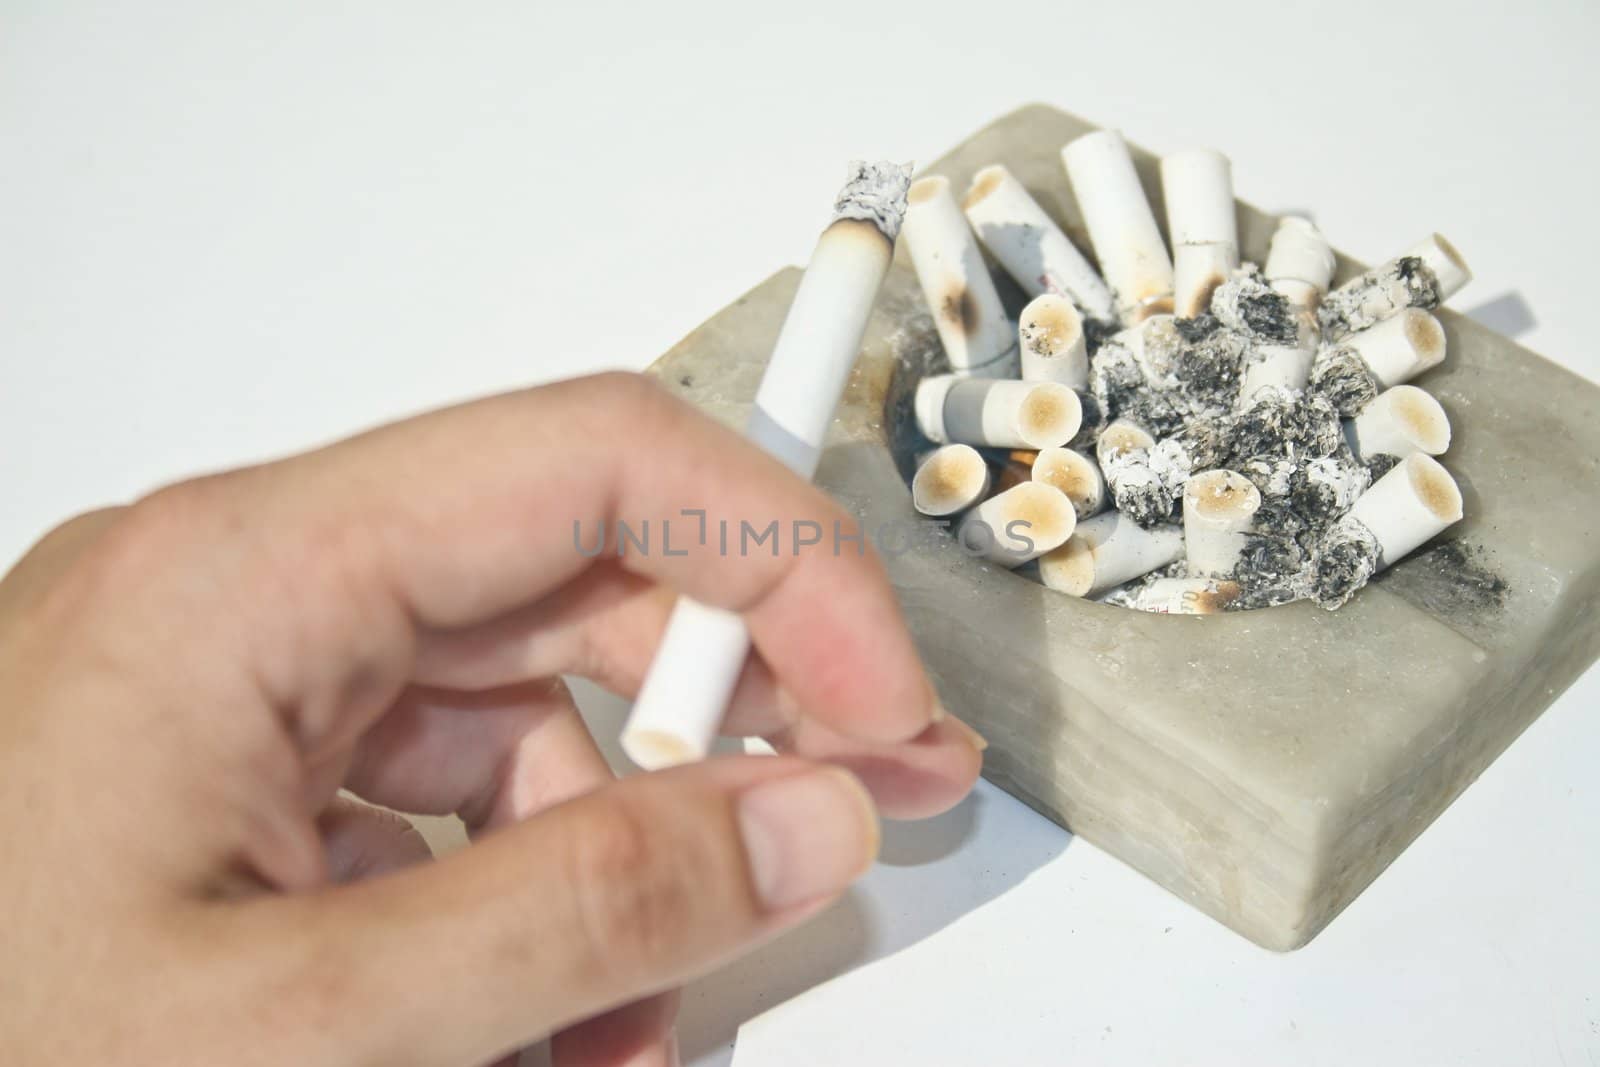 Full ashtray and hand holding cigarette by timscottrom